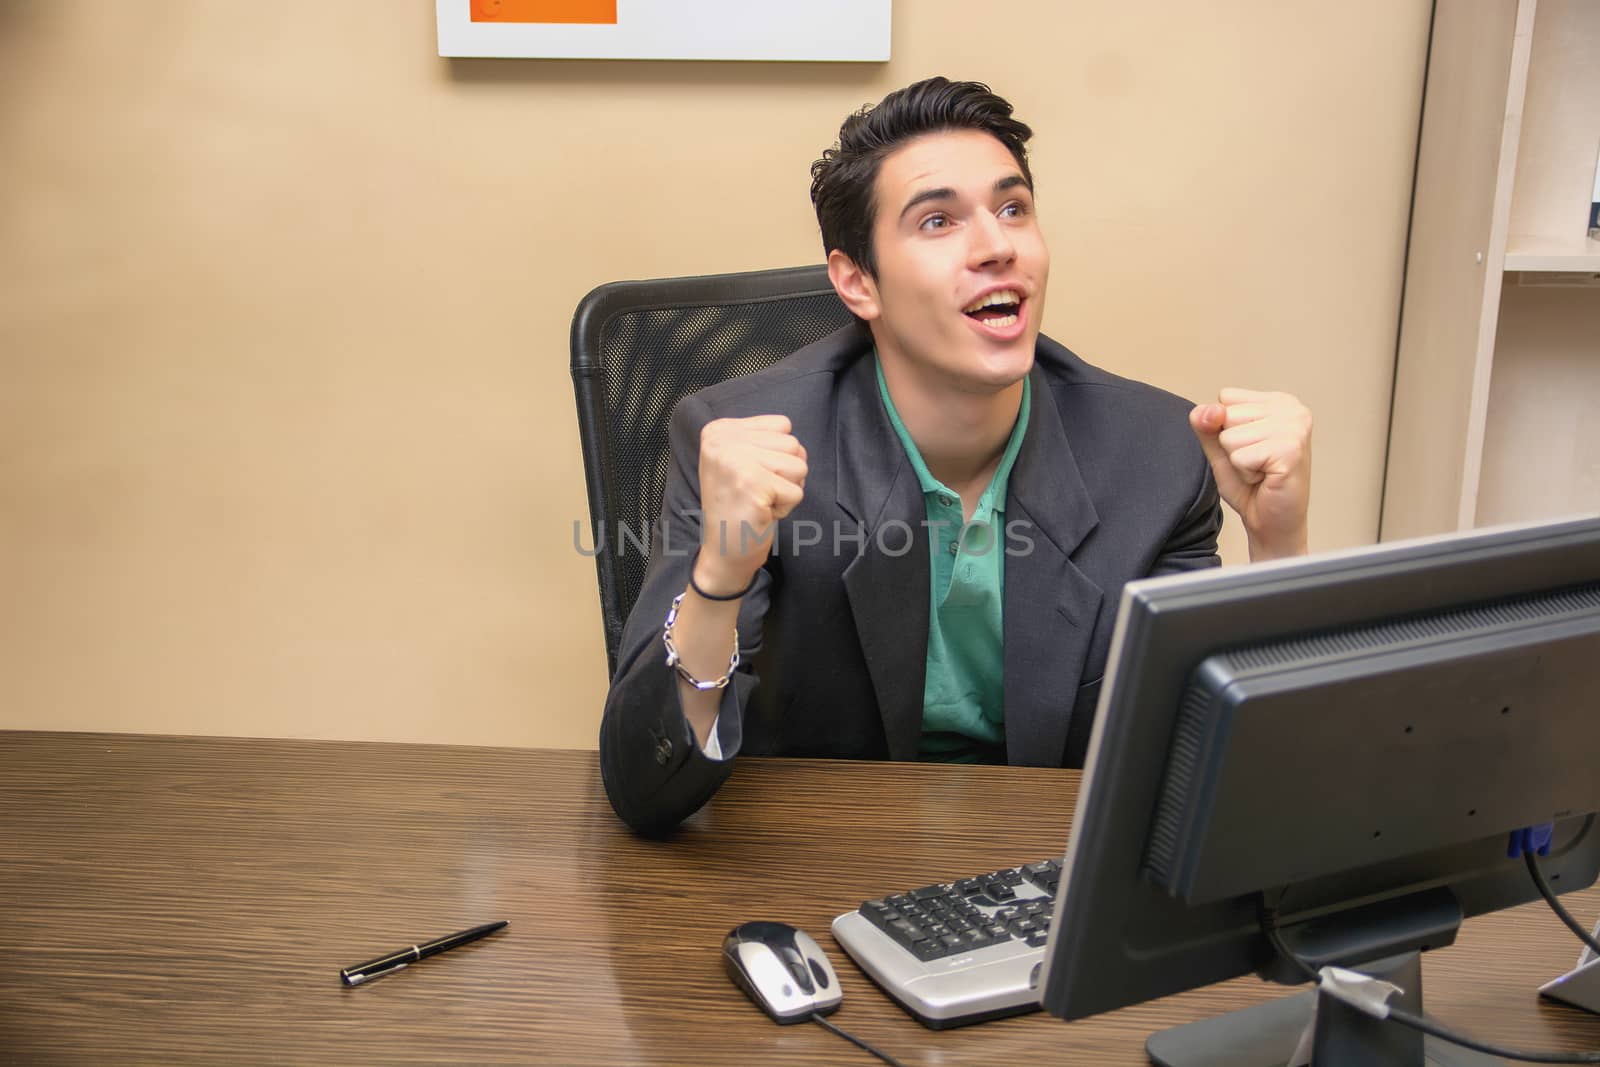 Happy young businessman screaming for joy, at desk in office by artofphoto